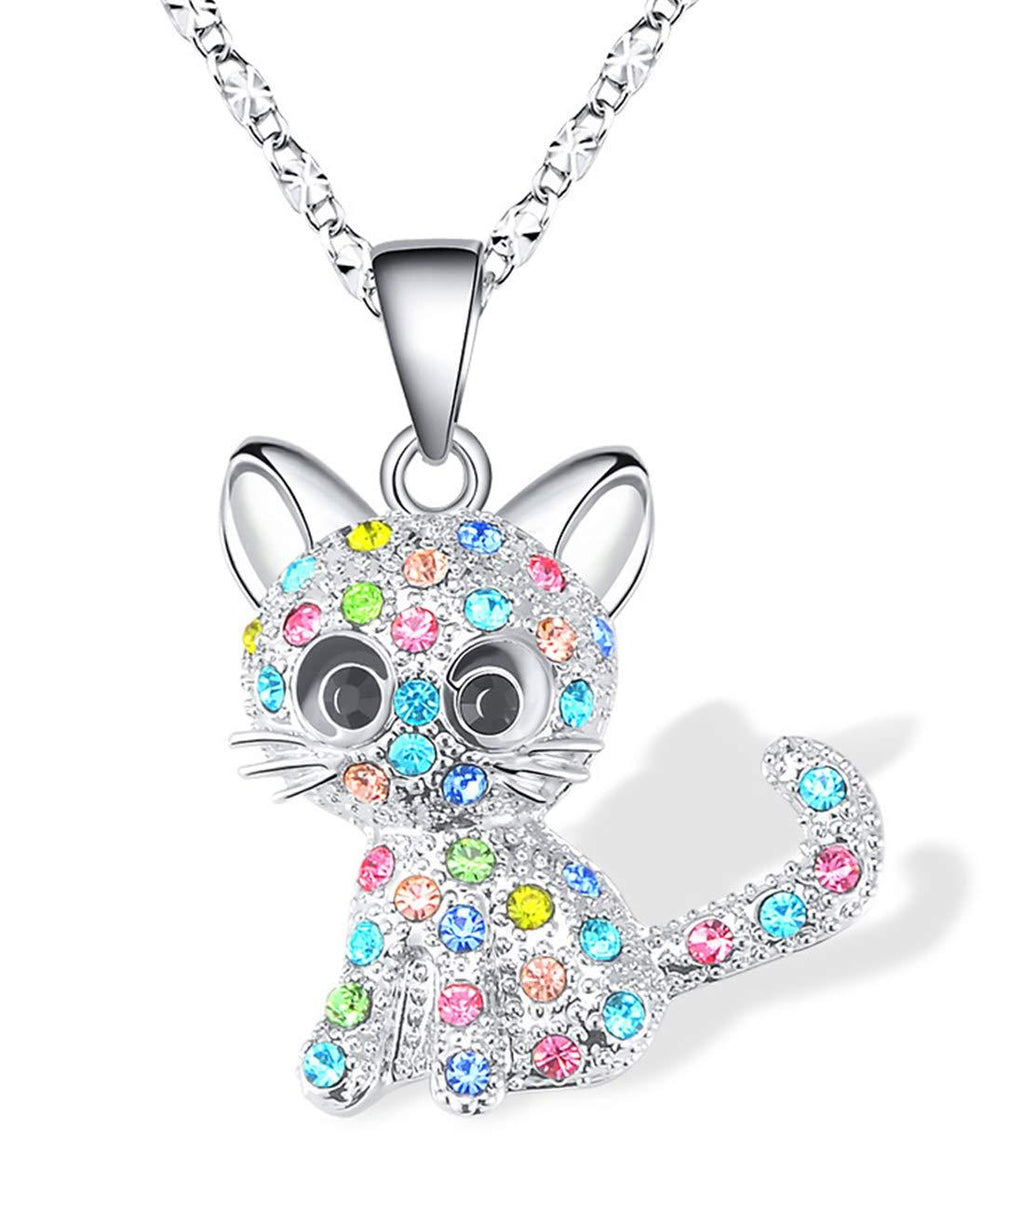 [Australia] - Lanqueen Kitty Cat Pendant Necklace Jewelry for Women Girls Cat Lover Gifts Daughter Loved Necklace 18+2.4 inch Chain A.color(new) 